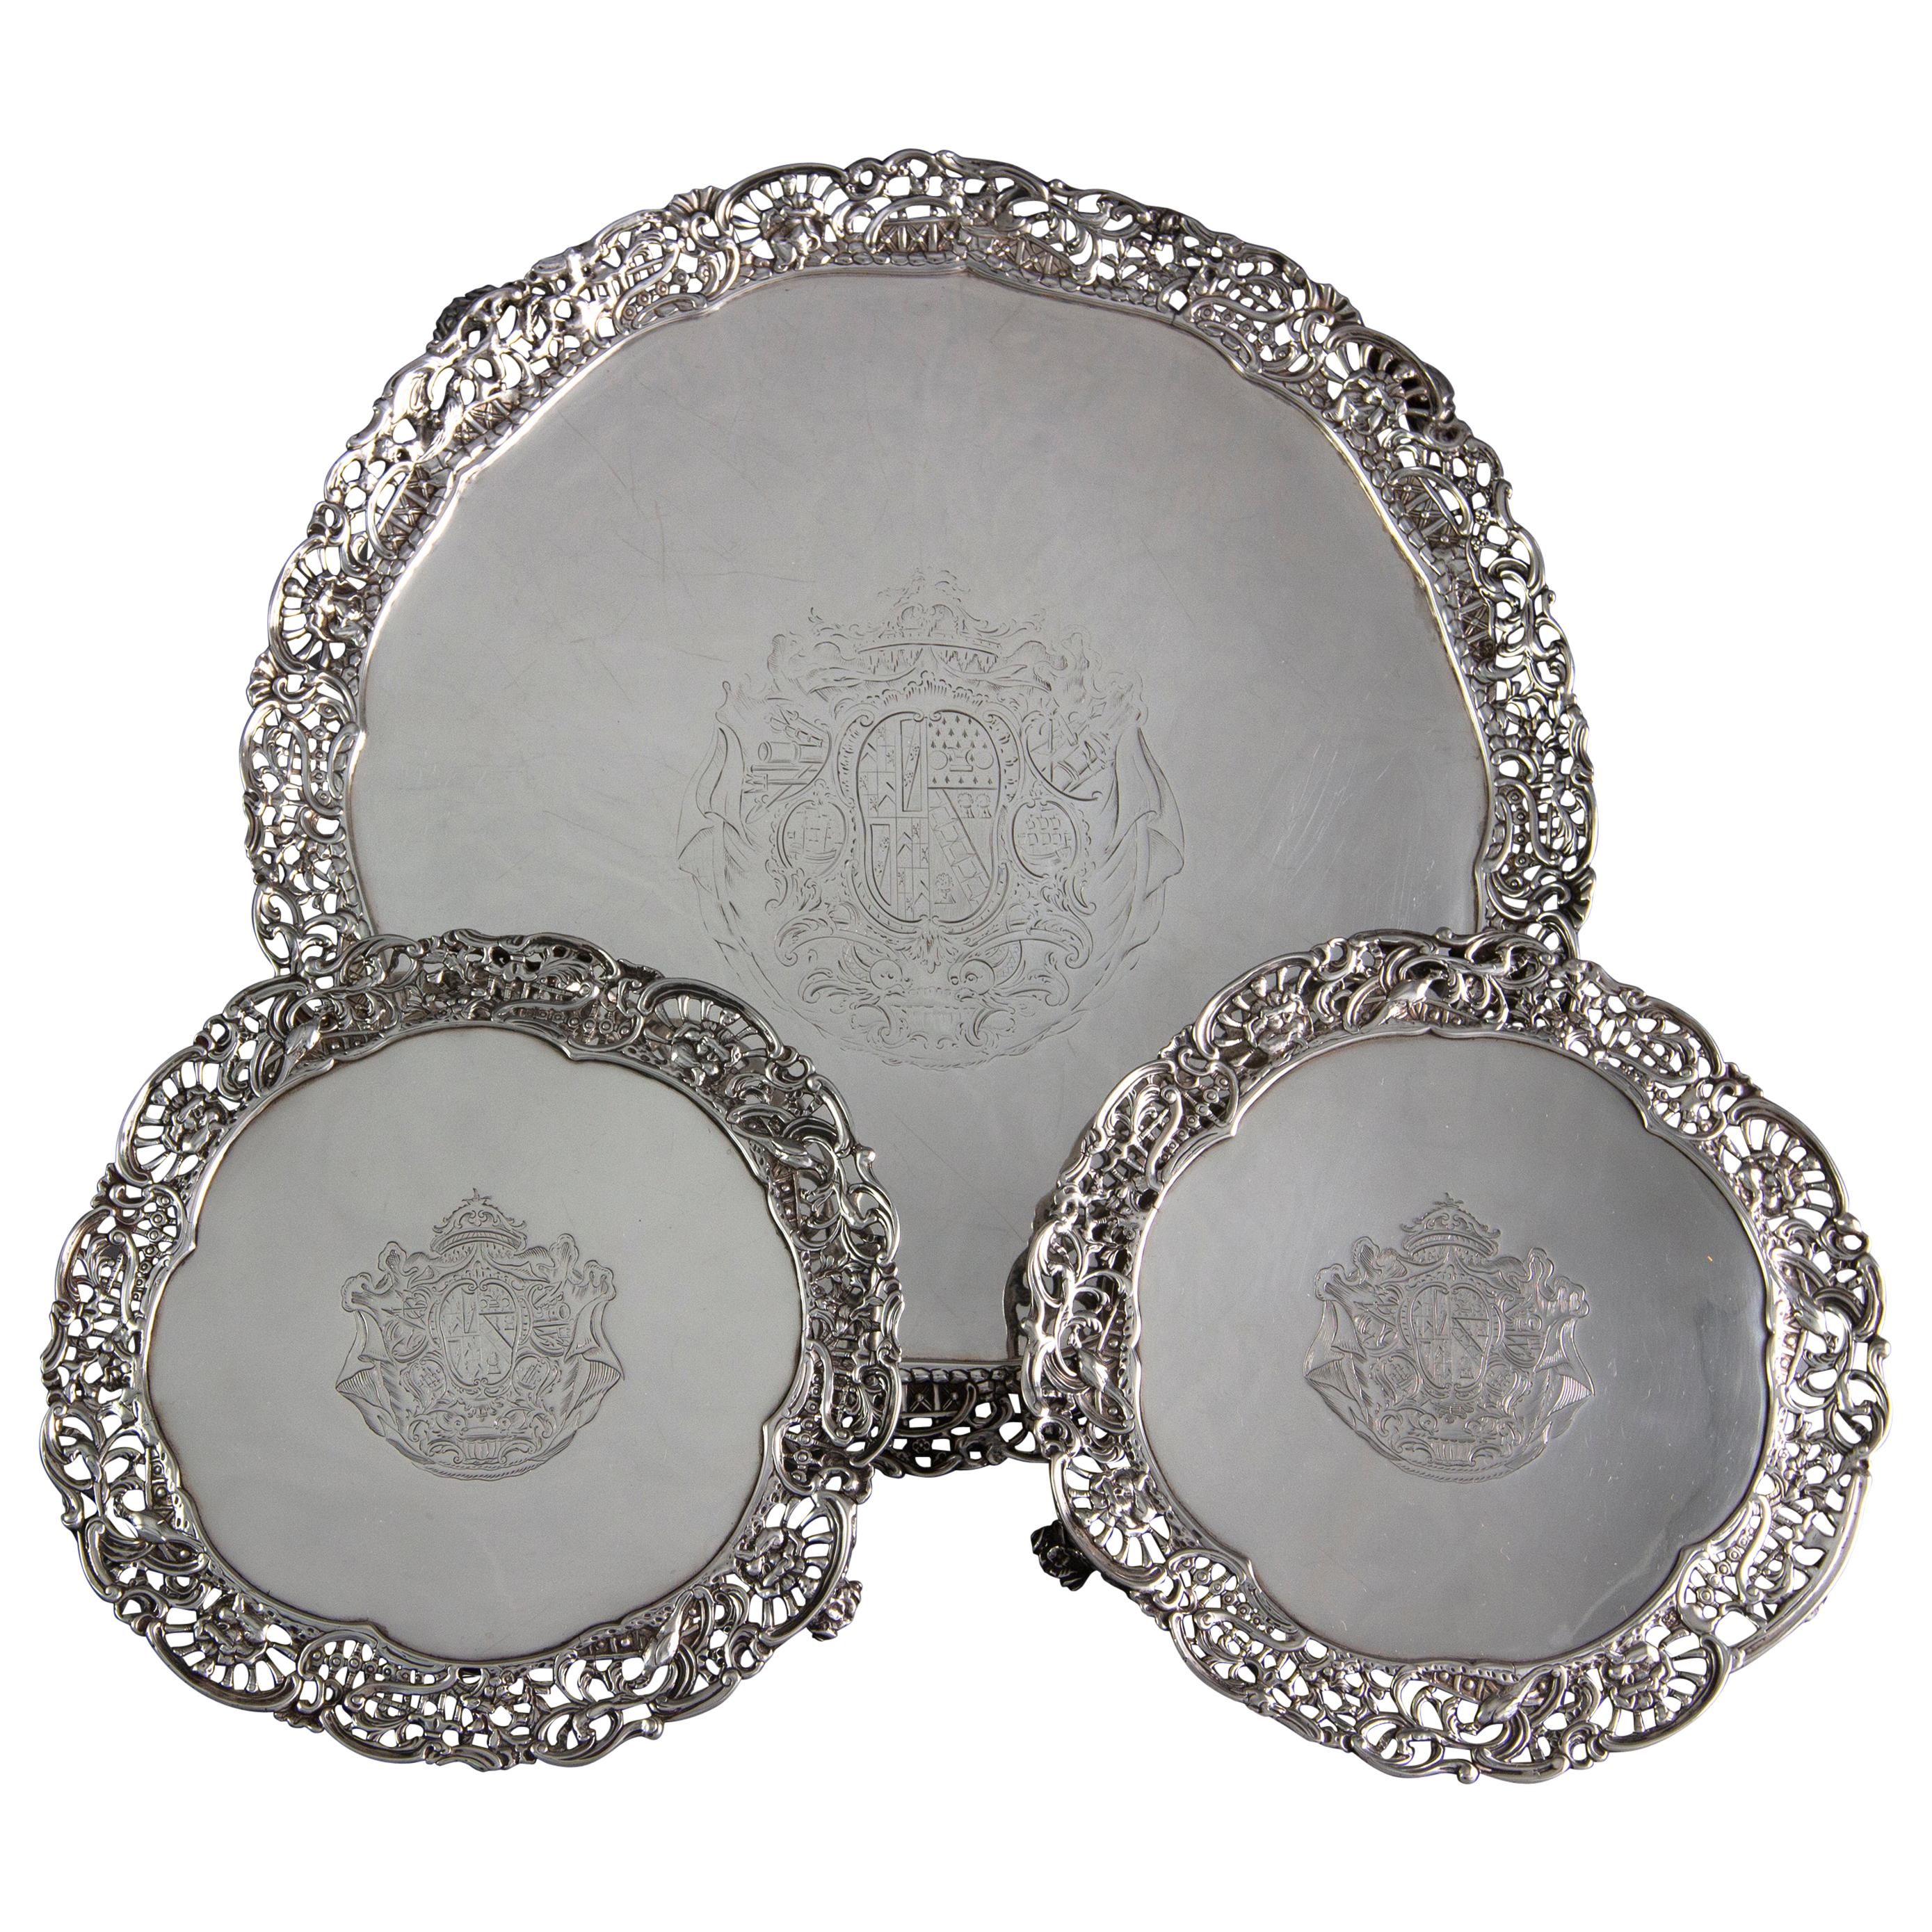 Set of 3 George III Silver Salvers or Trays, London 1762 by Richard Rugg